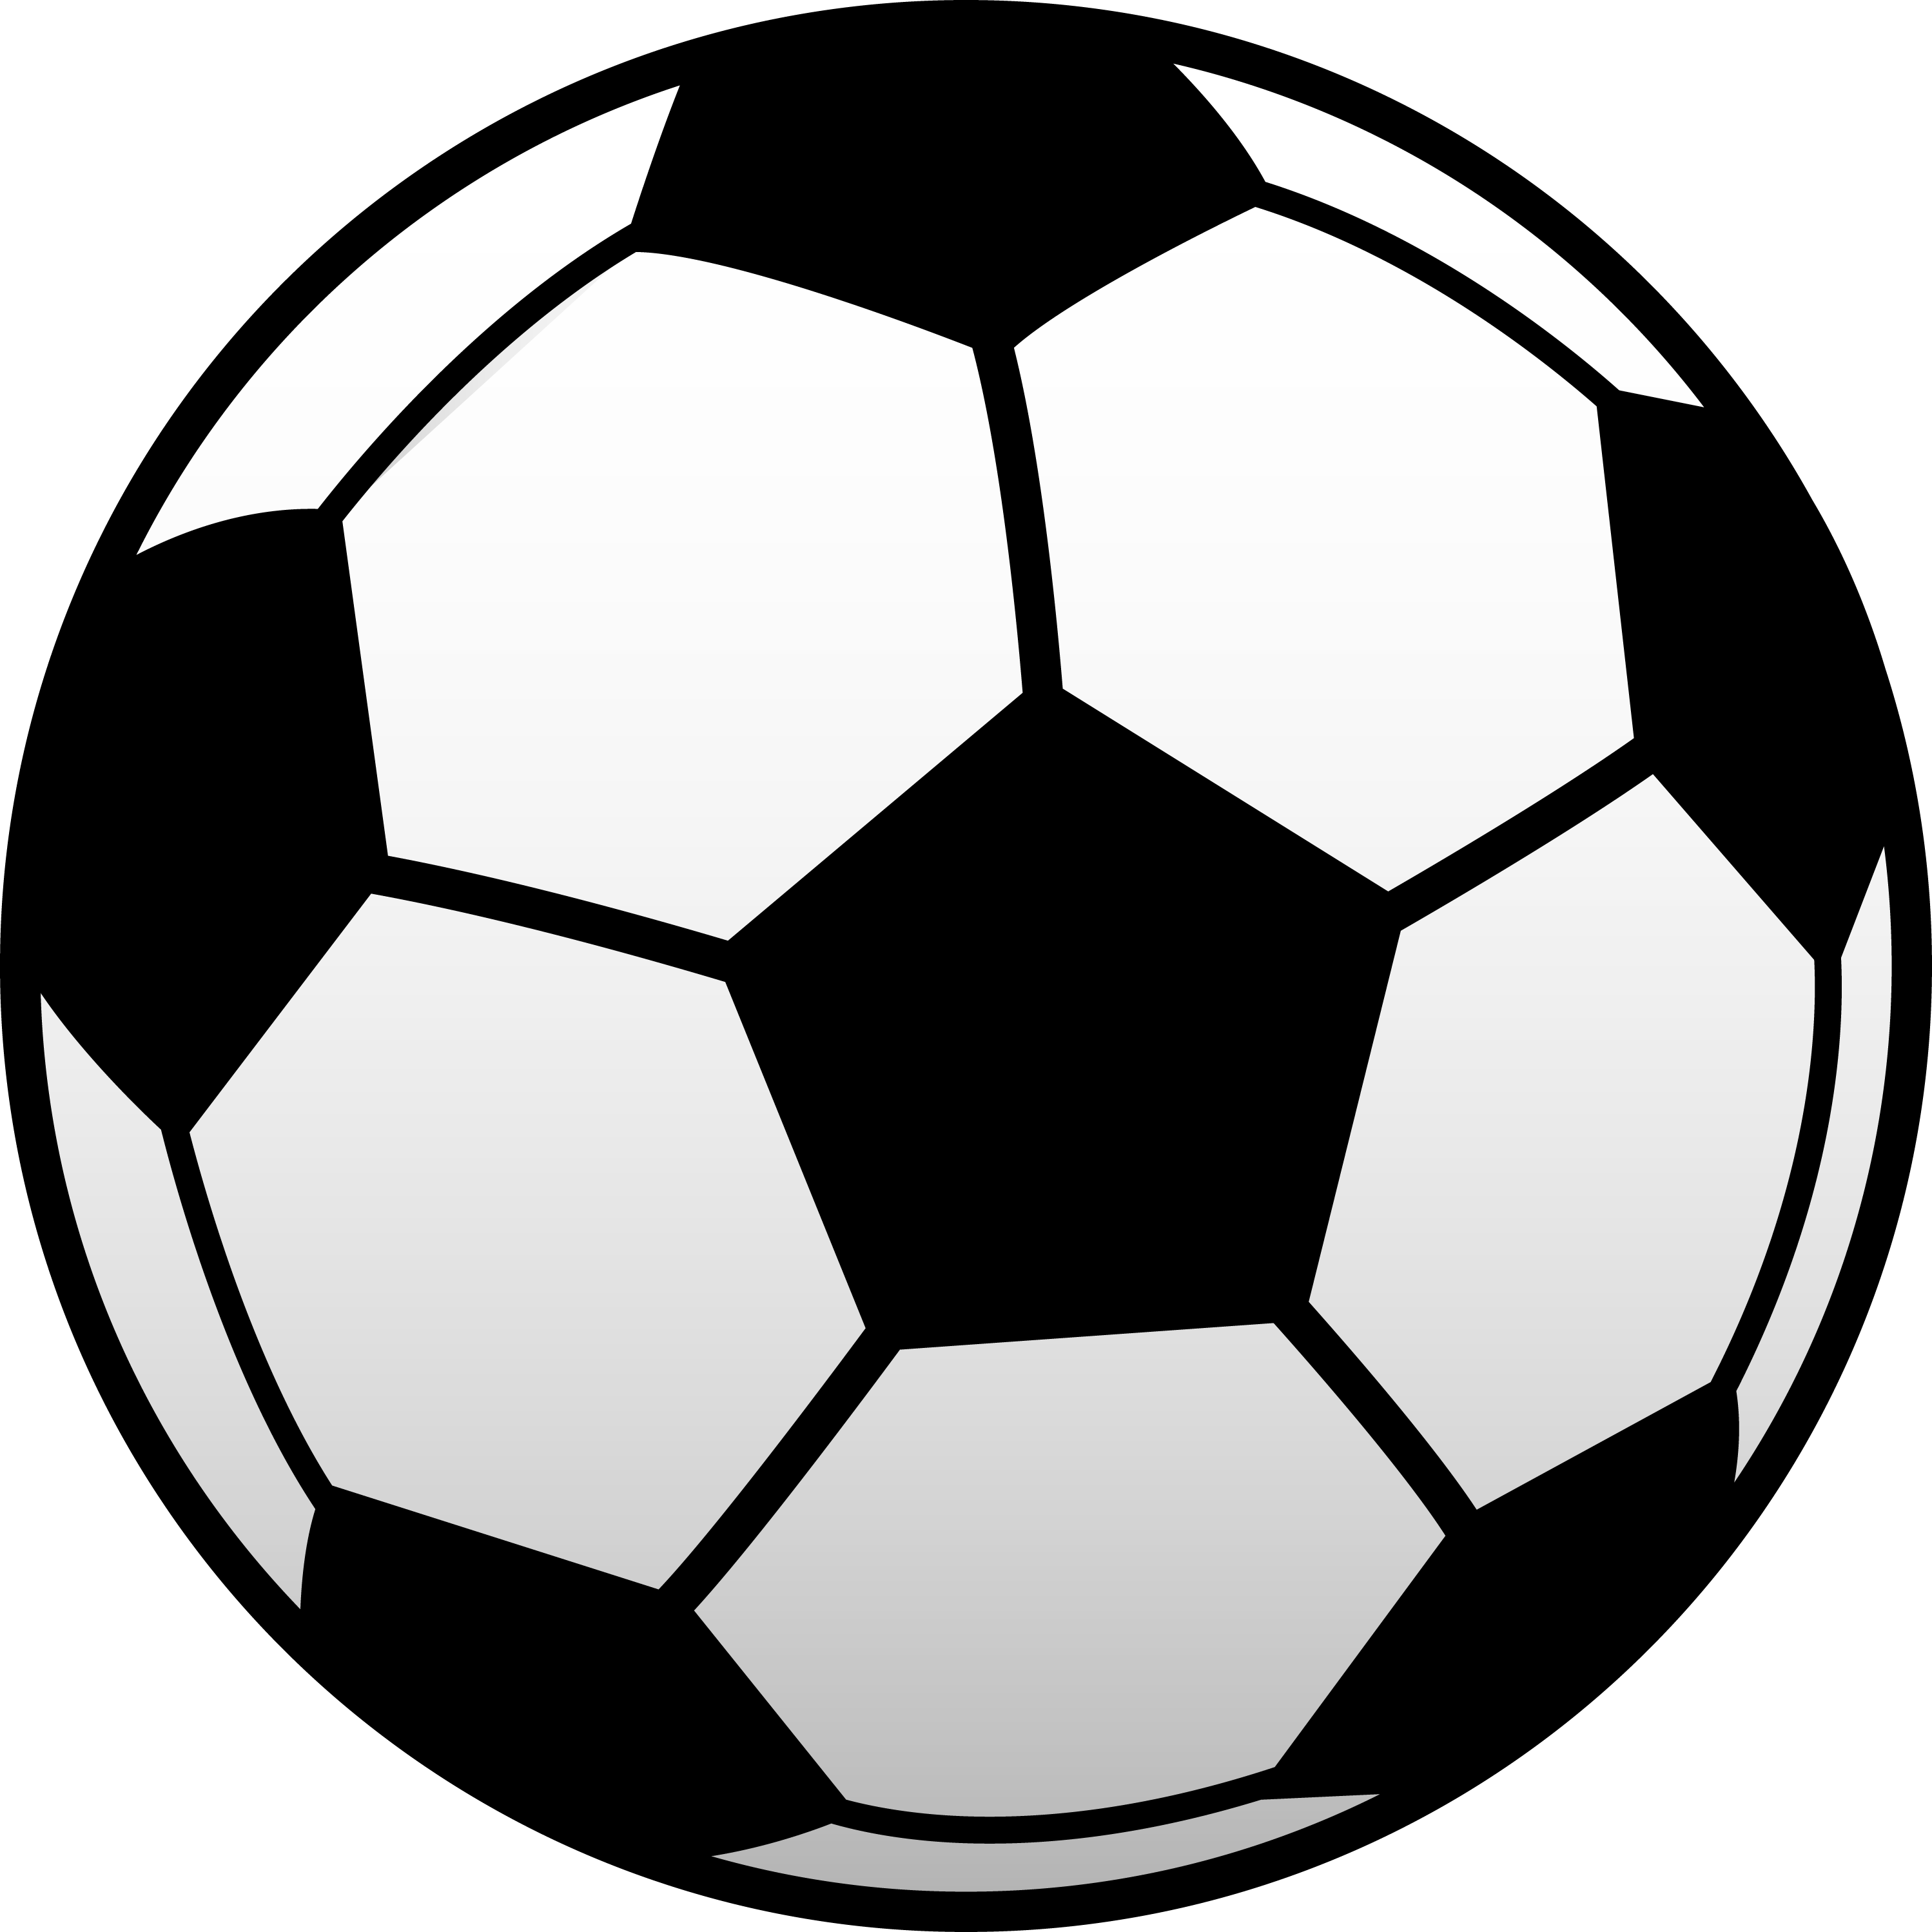 Soccer Ball Black And White Clipart